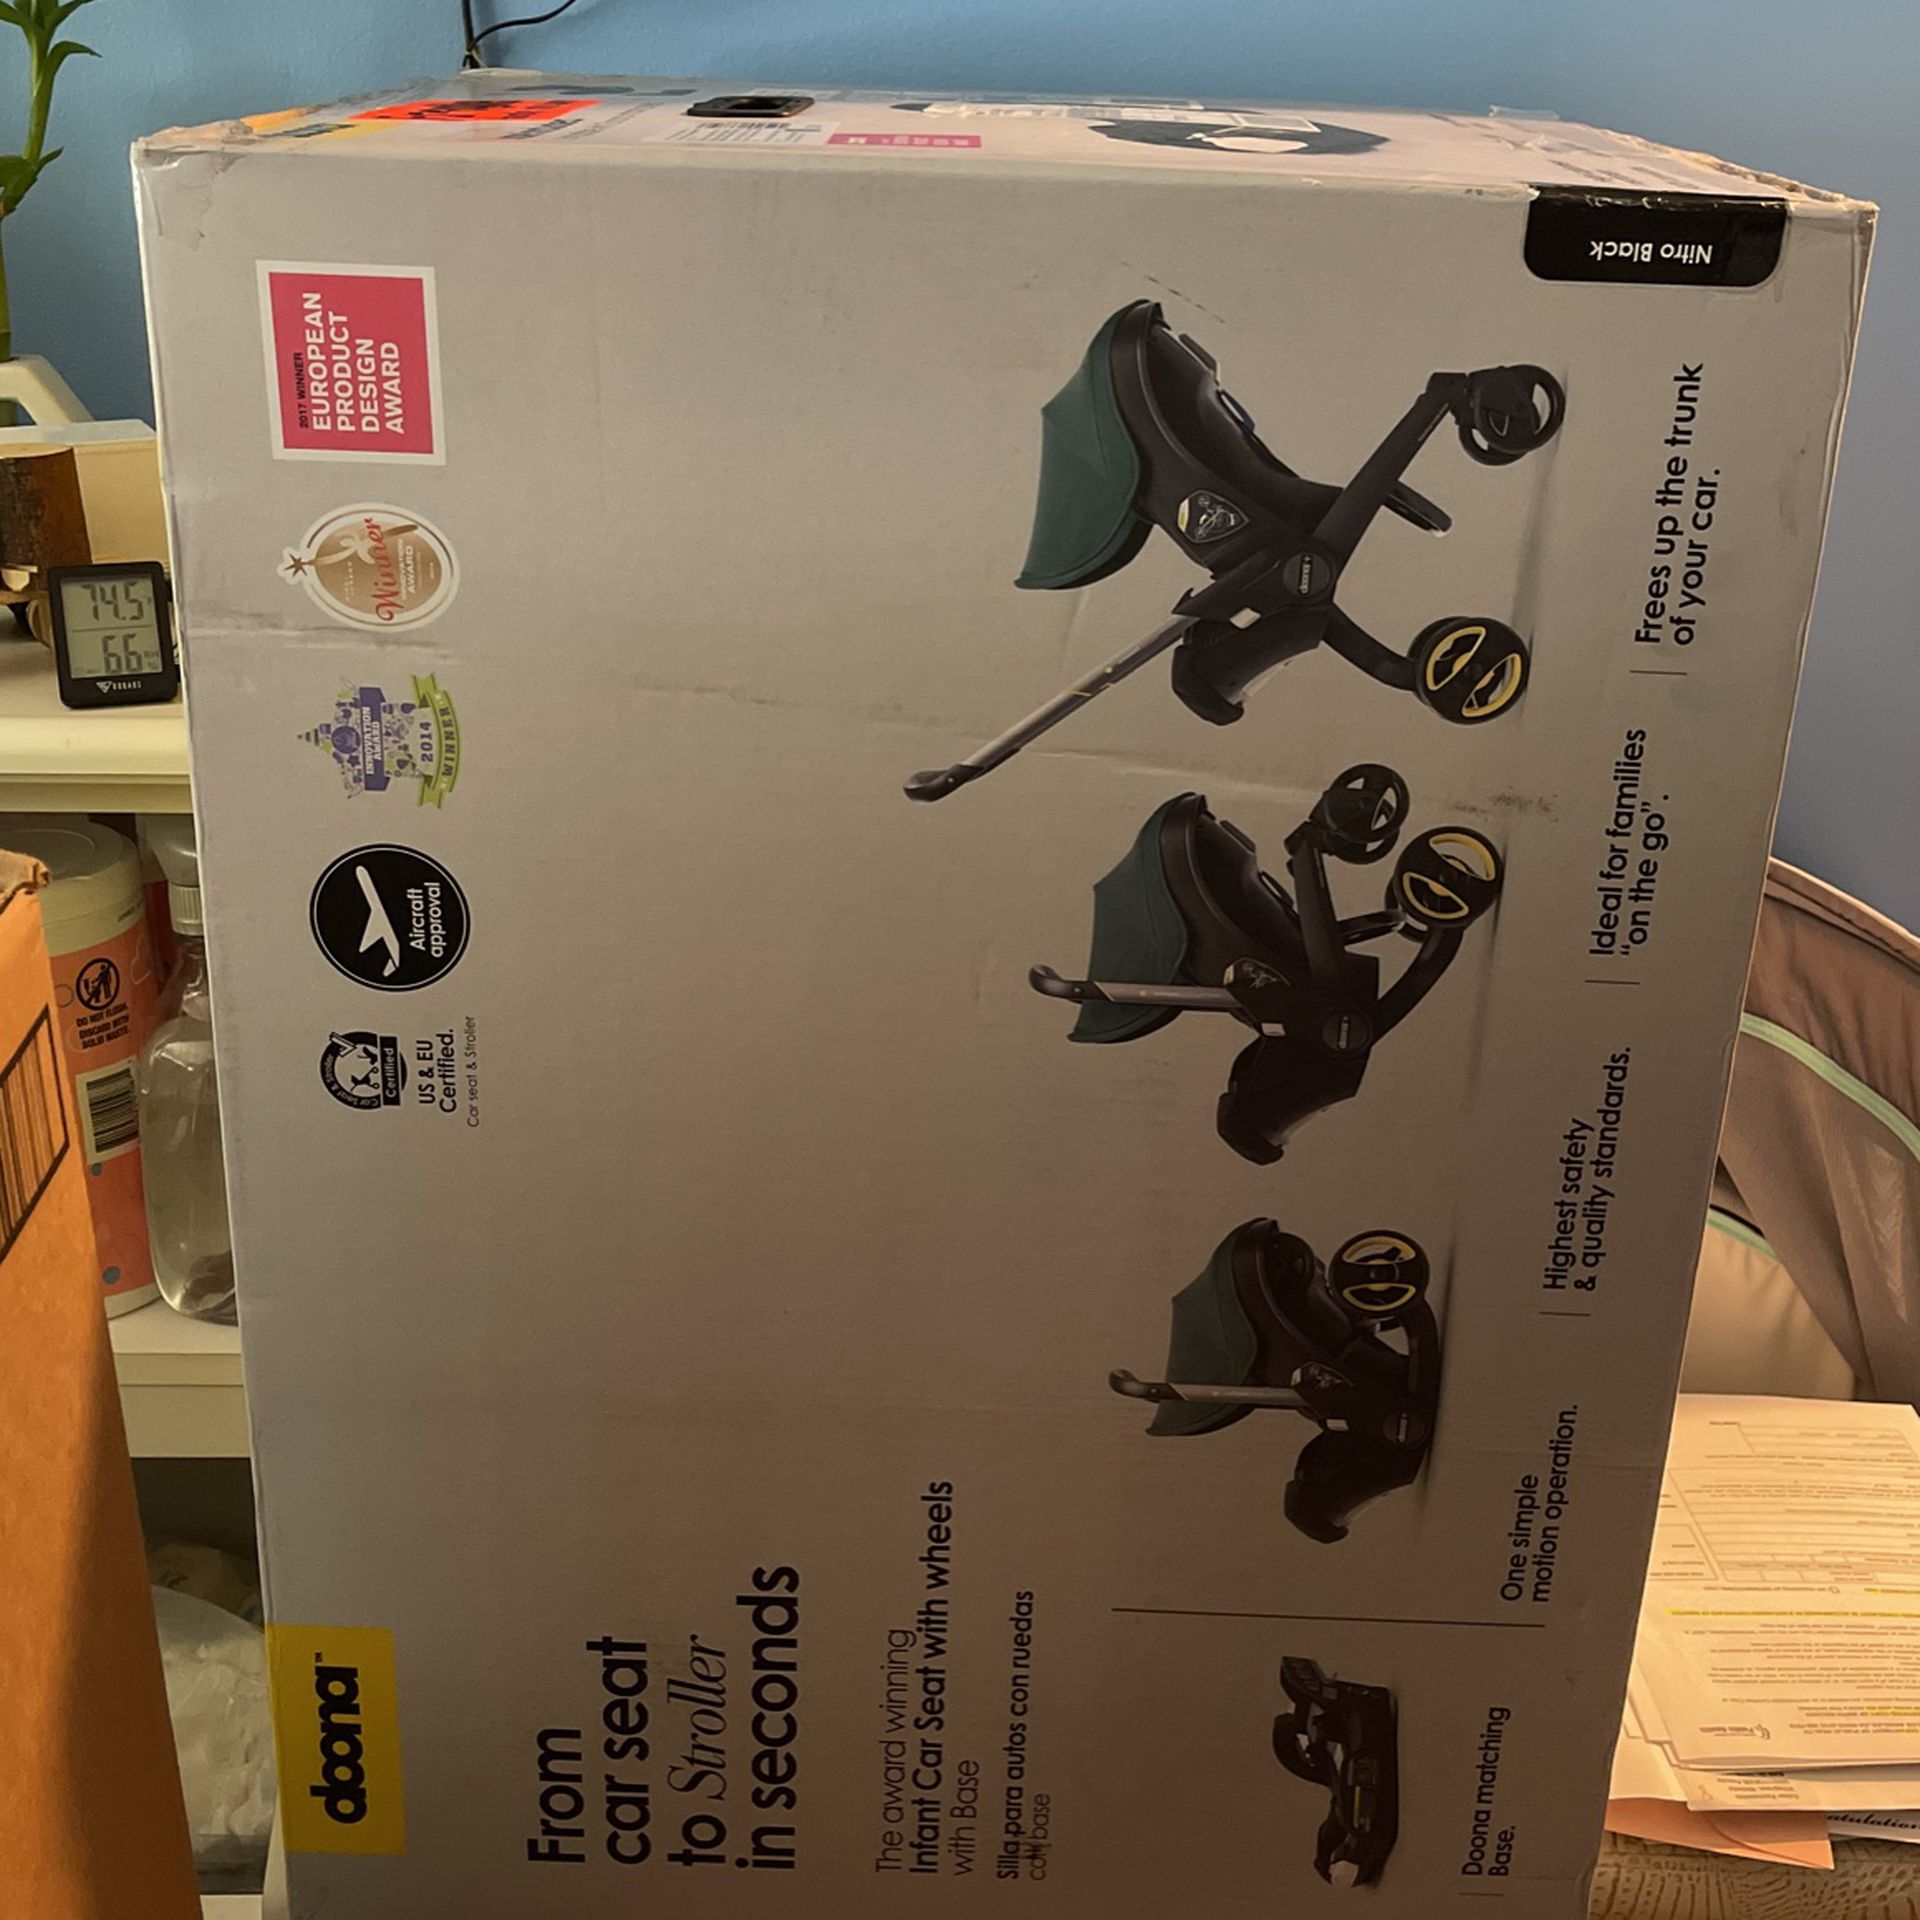 Brand New Nitro Black Doona Stroller Car seat With Base Expires 06/2027 and it was made 06/2021  700 Or Best Offer